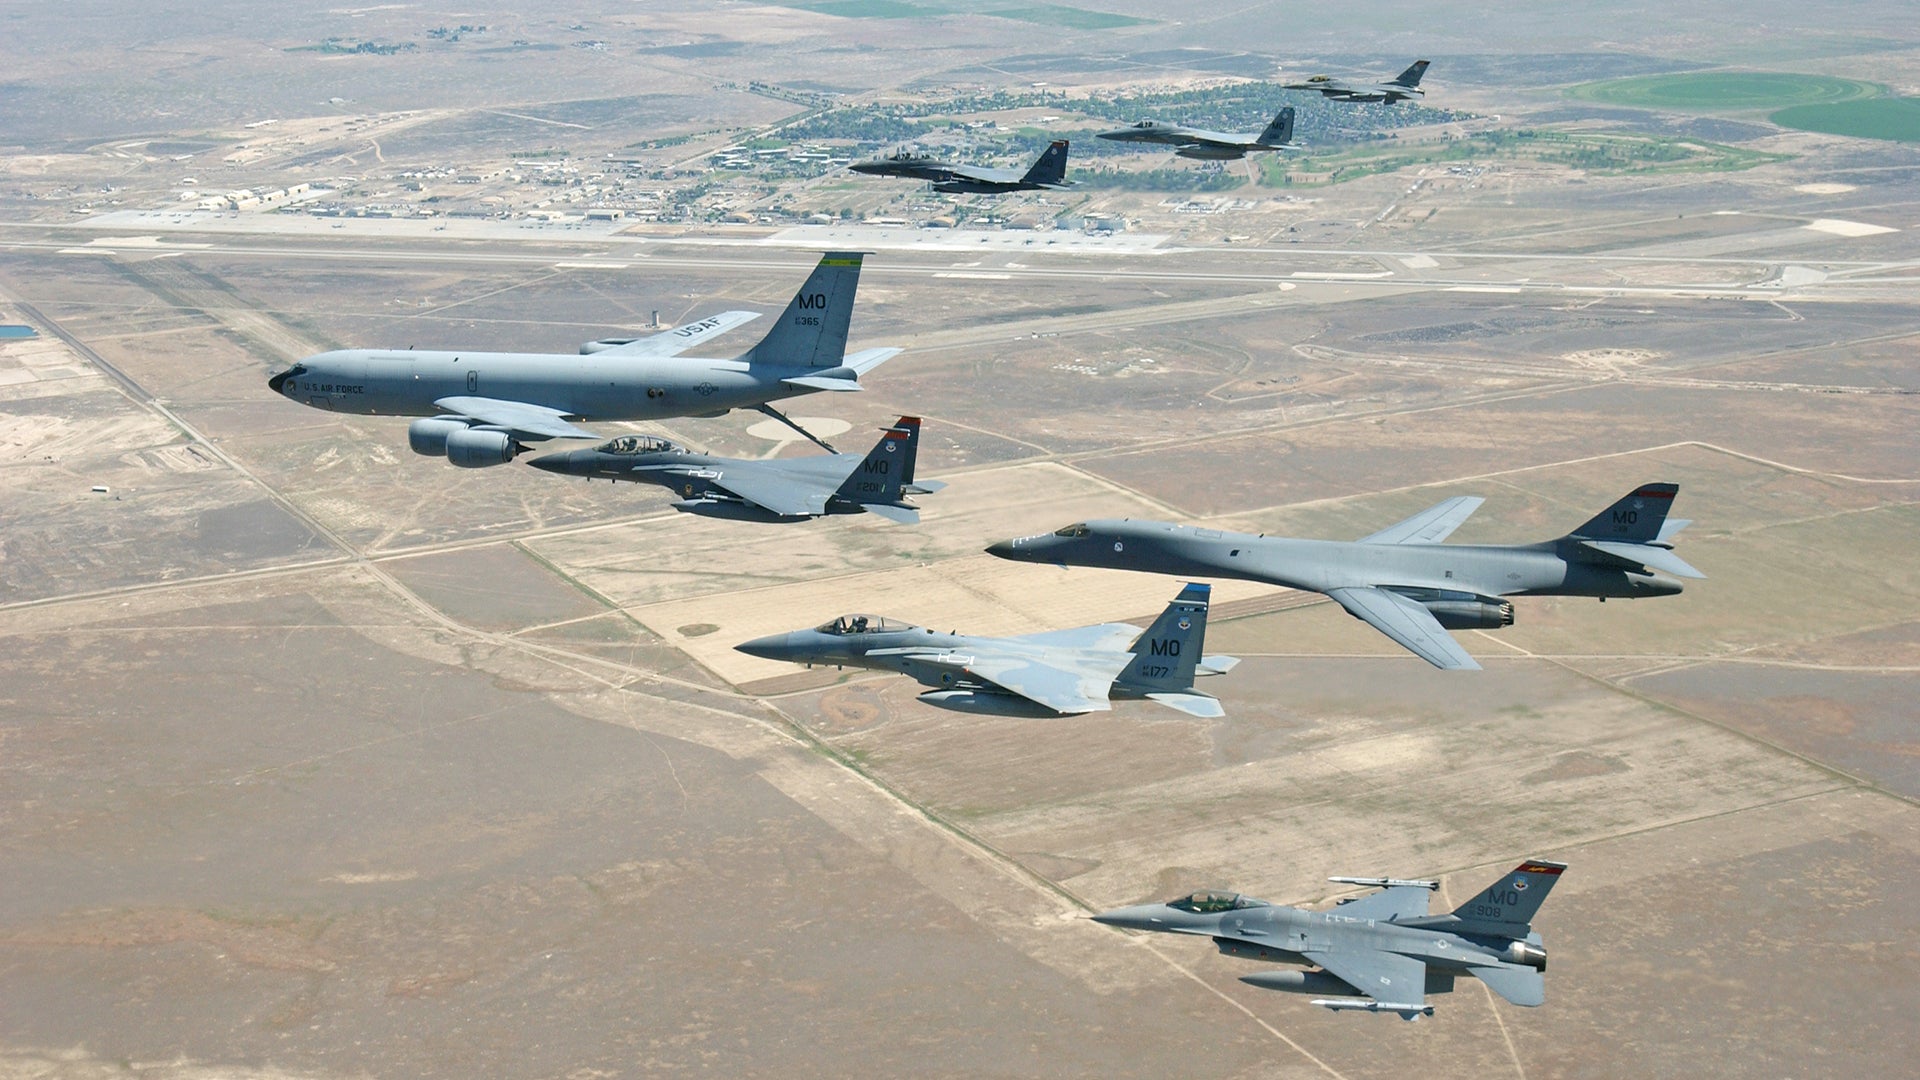 Remembering When The 366th Wing Was An Experimental Rapid Response ‘Air Force In A Box’